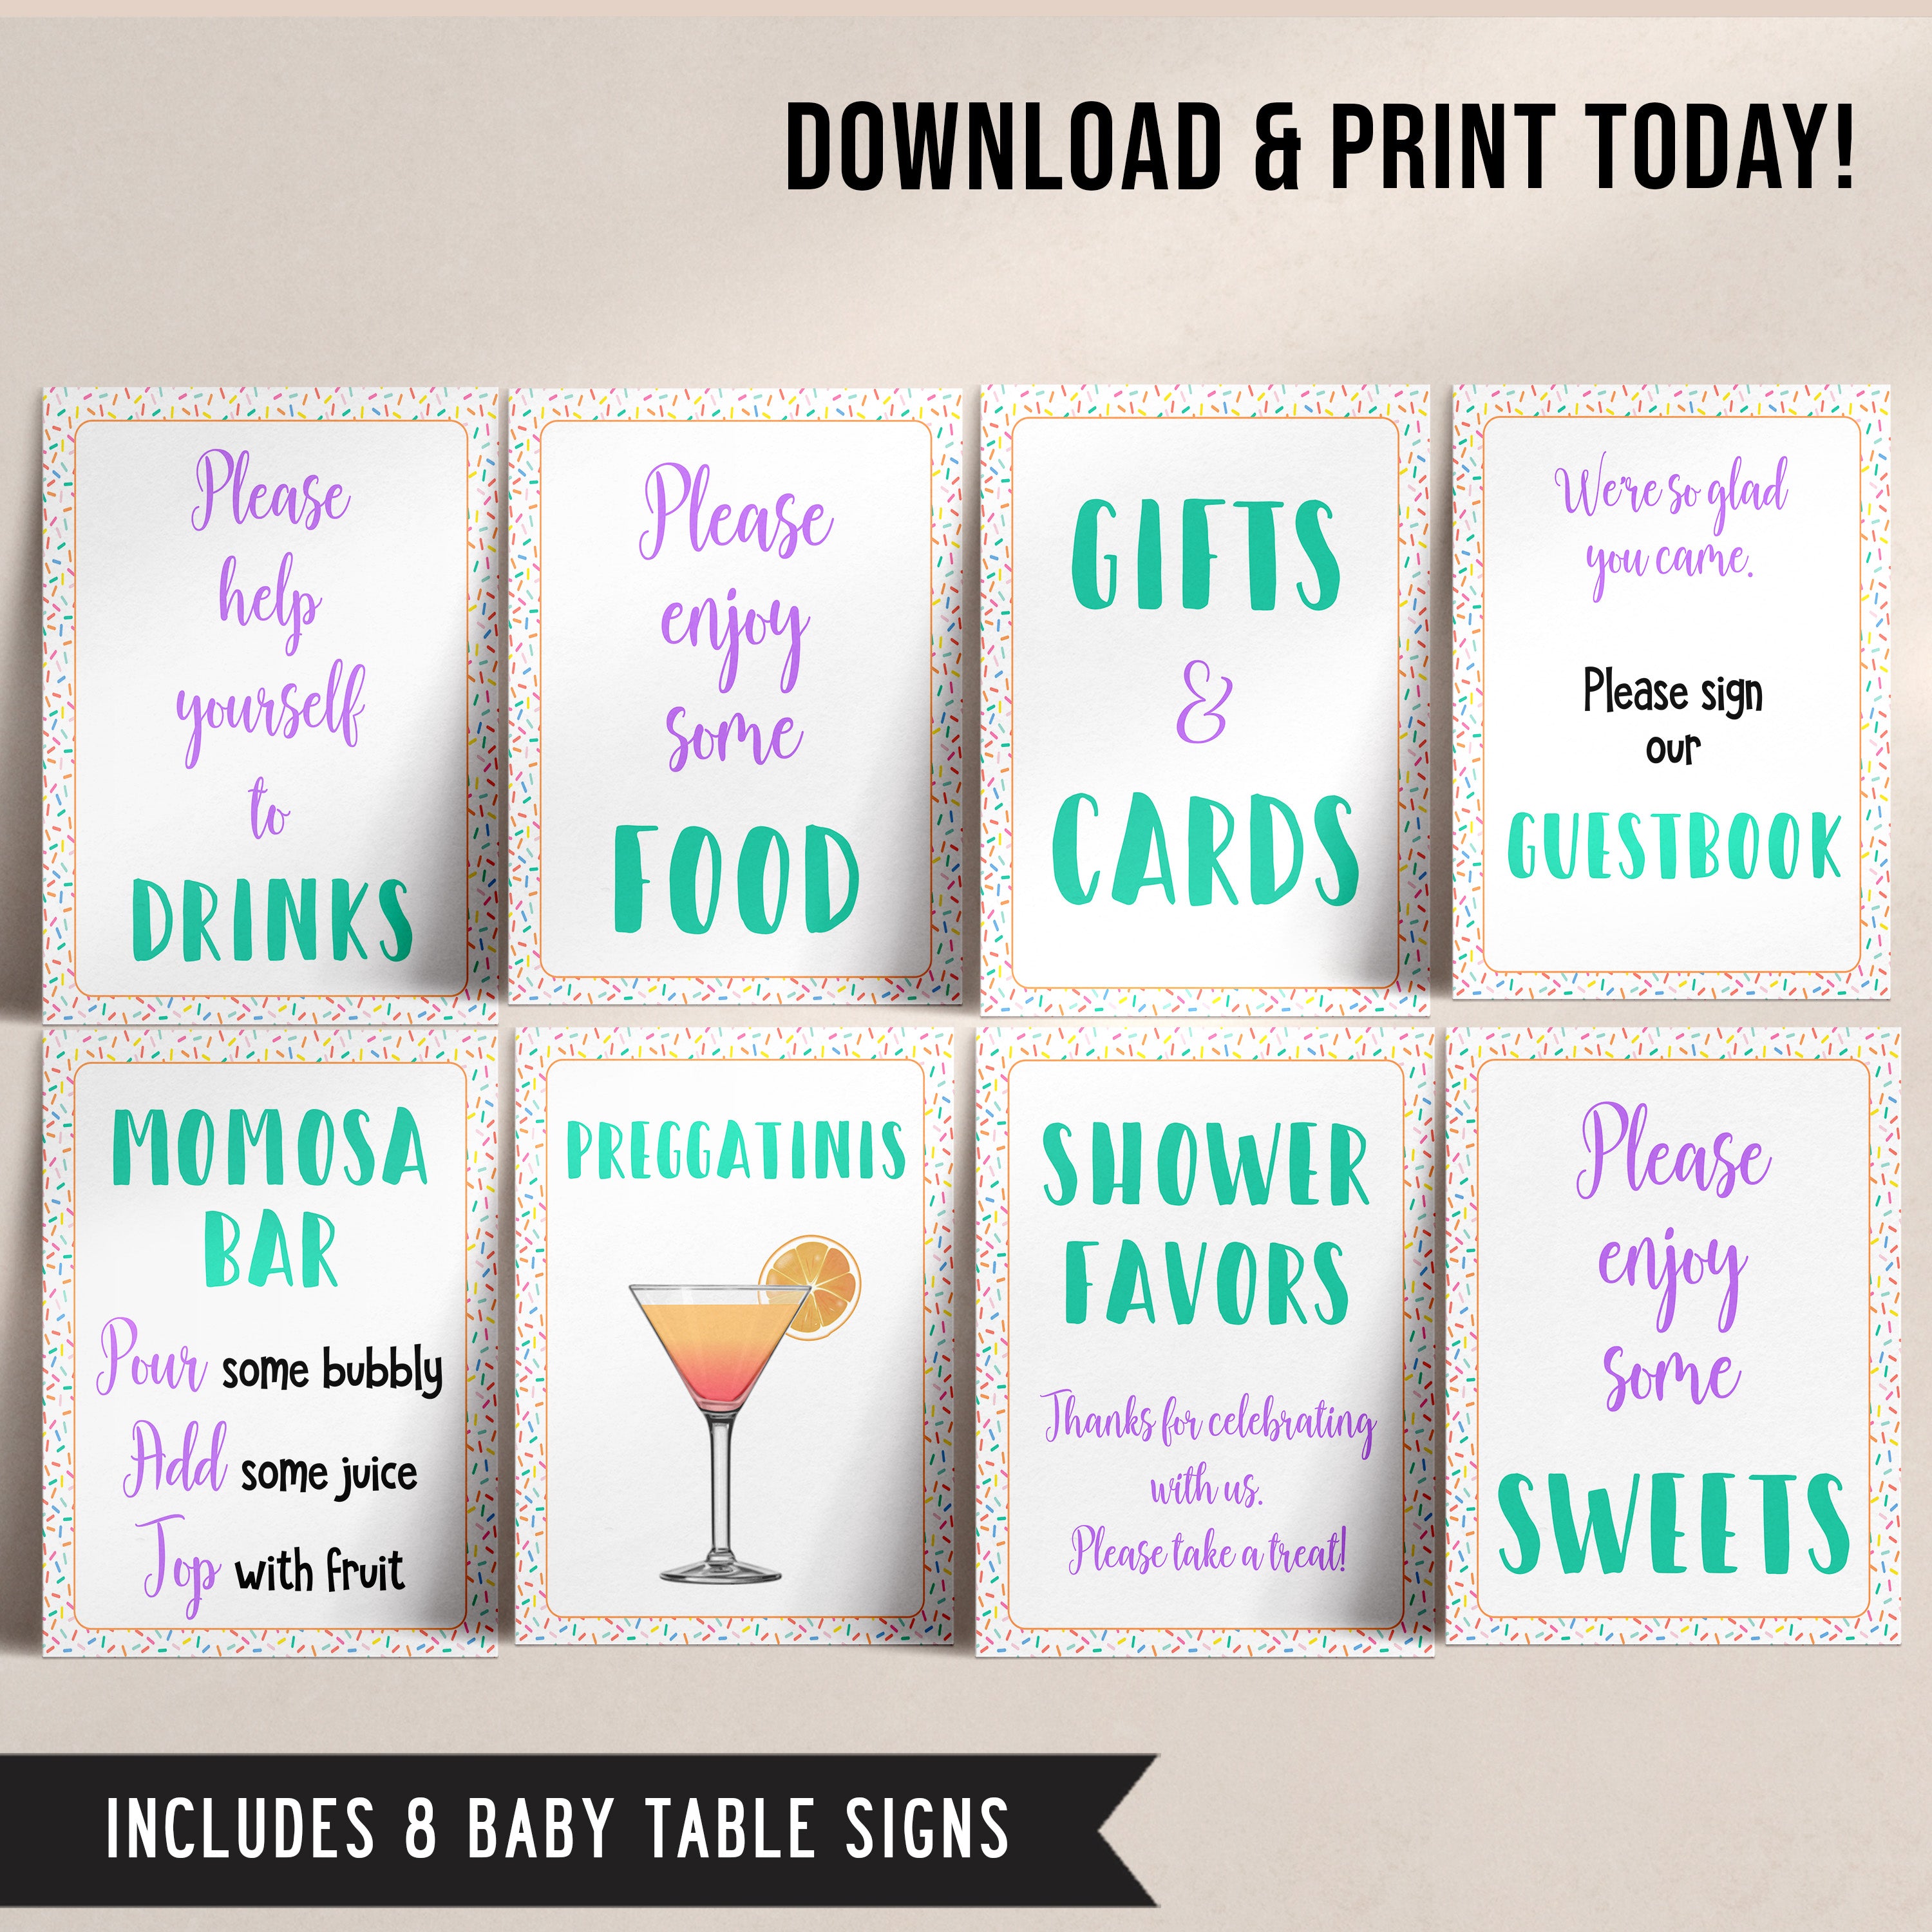 8 baby tables signs, baby table decor, Baby sprinkle baby decor, printable baby table signs, printable baby decor, baby sprinkle table signs, fun baby signs, baby sprinkle fun baby table signs